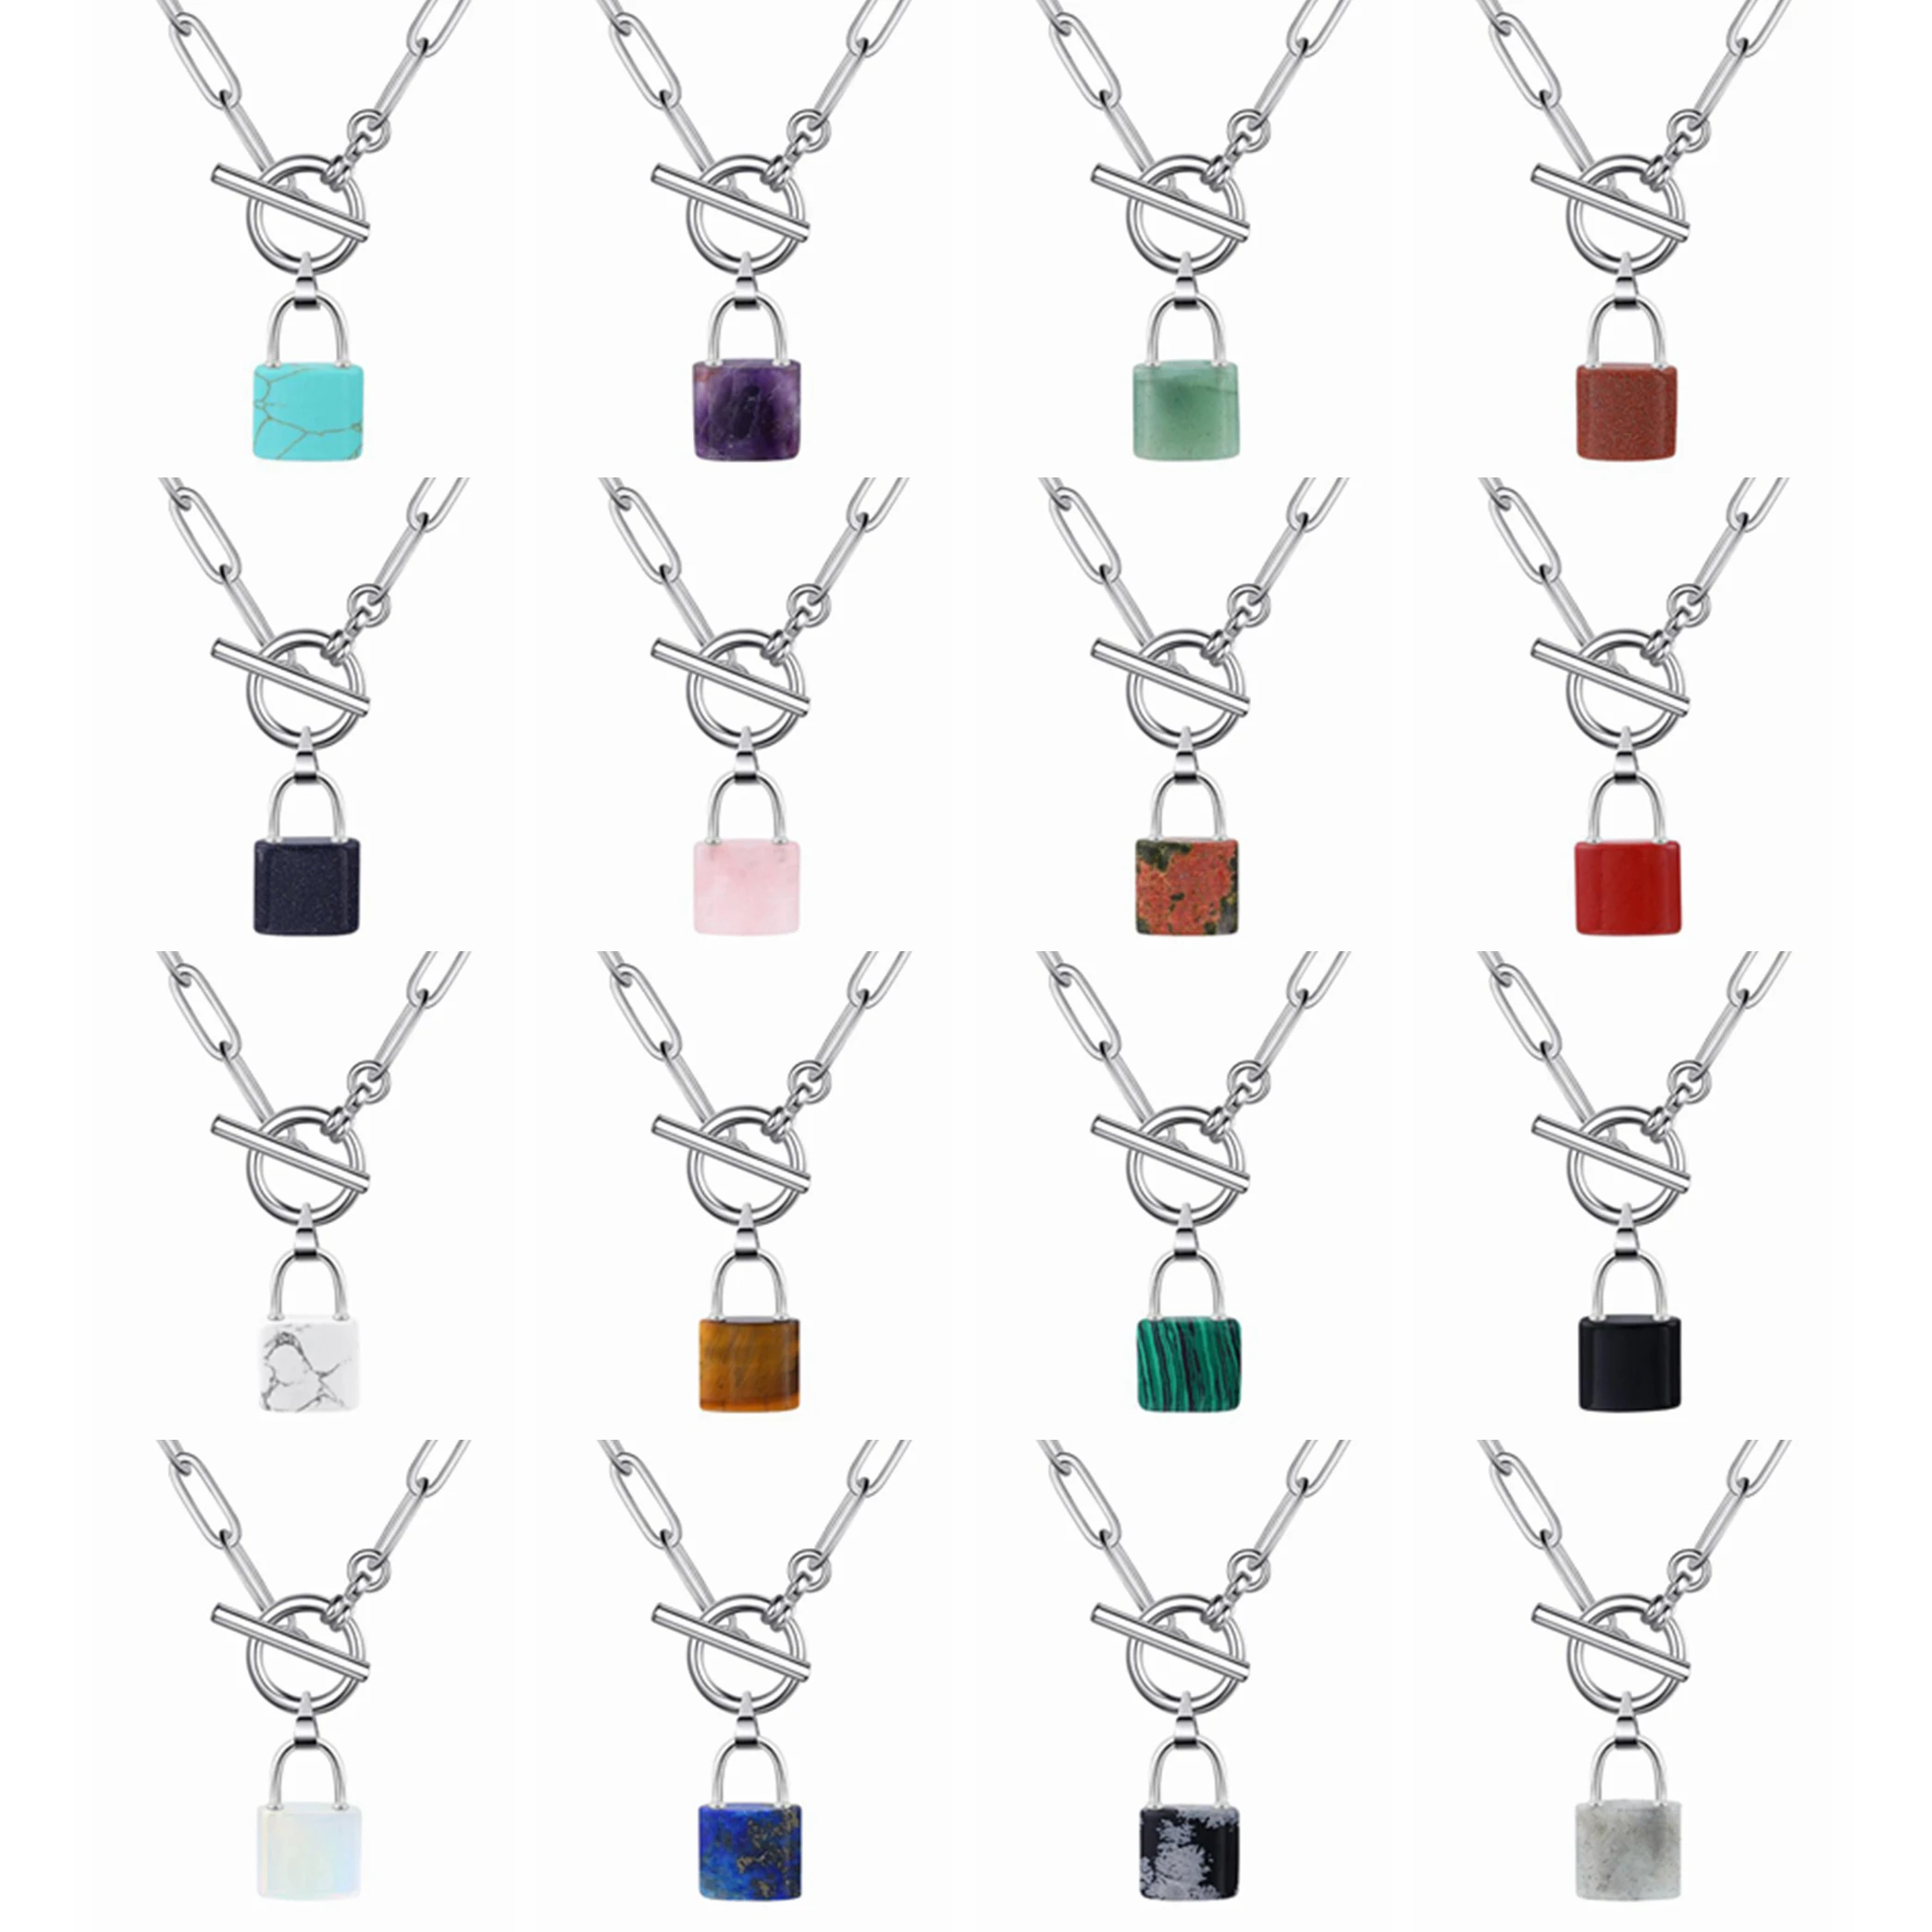 

Dainty Crystal Lock Pendant Necklaces IQ Clasp Simple Cute Stainless Steel Link Chain Choker for Women Girls Statement Jewelry